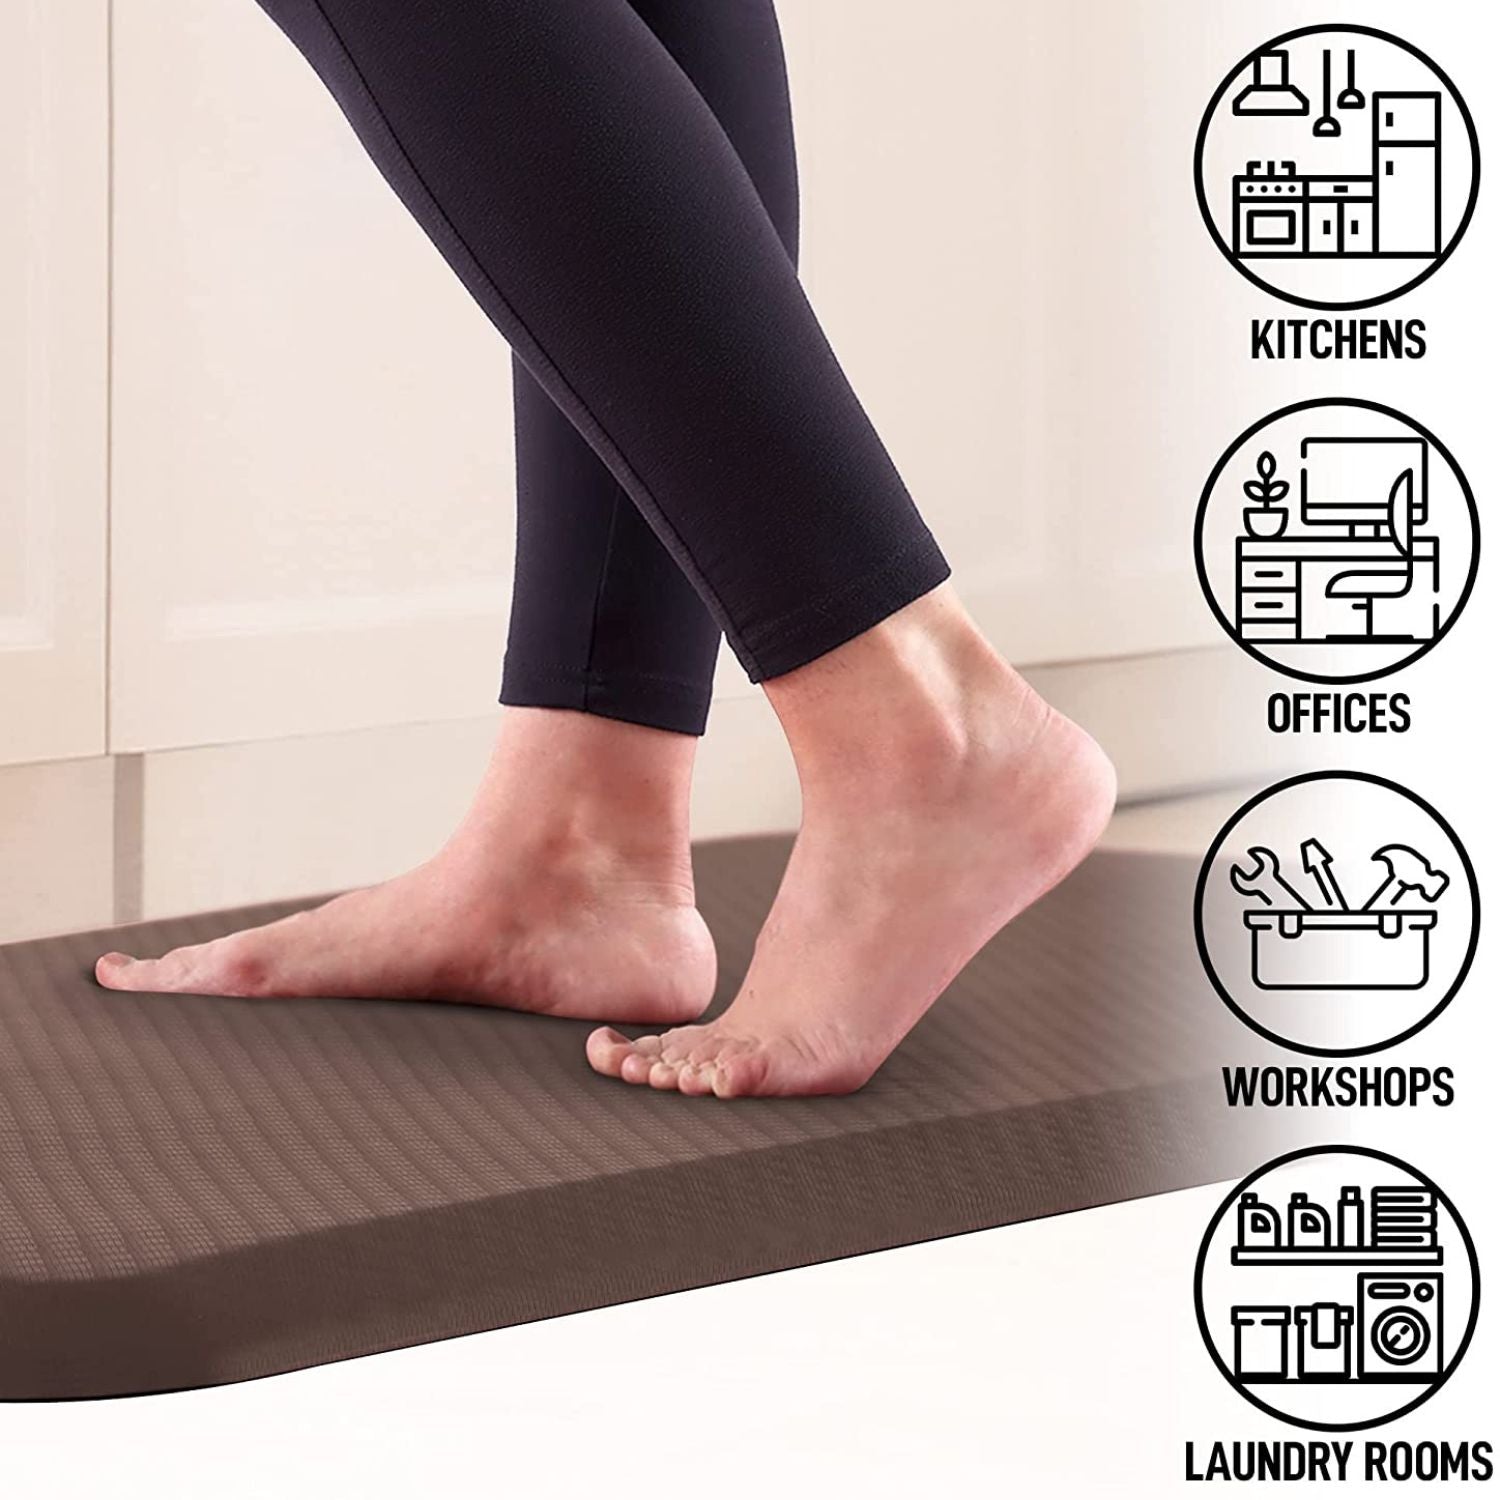 Anti Fatigue Kitchen Mats for Floor 2 Piece Set, Memory Foam Cushioned Rugs,  Comfort Standing Desk Mats for Office, Home, Laundry Room, Wate 